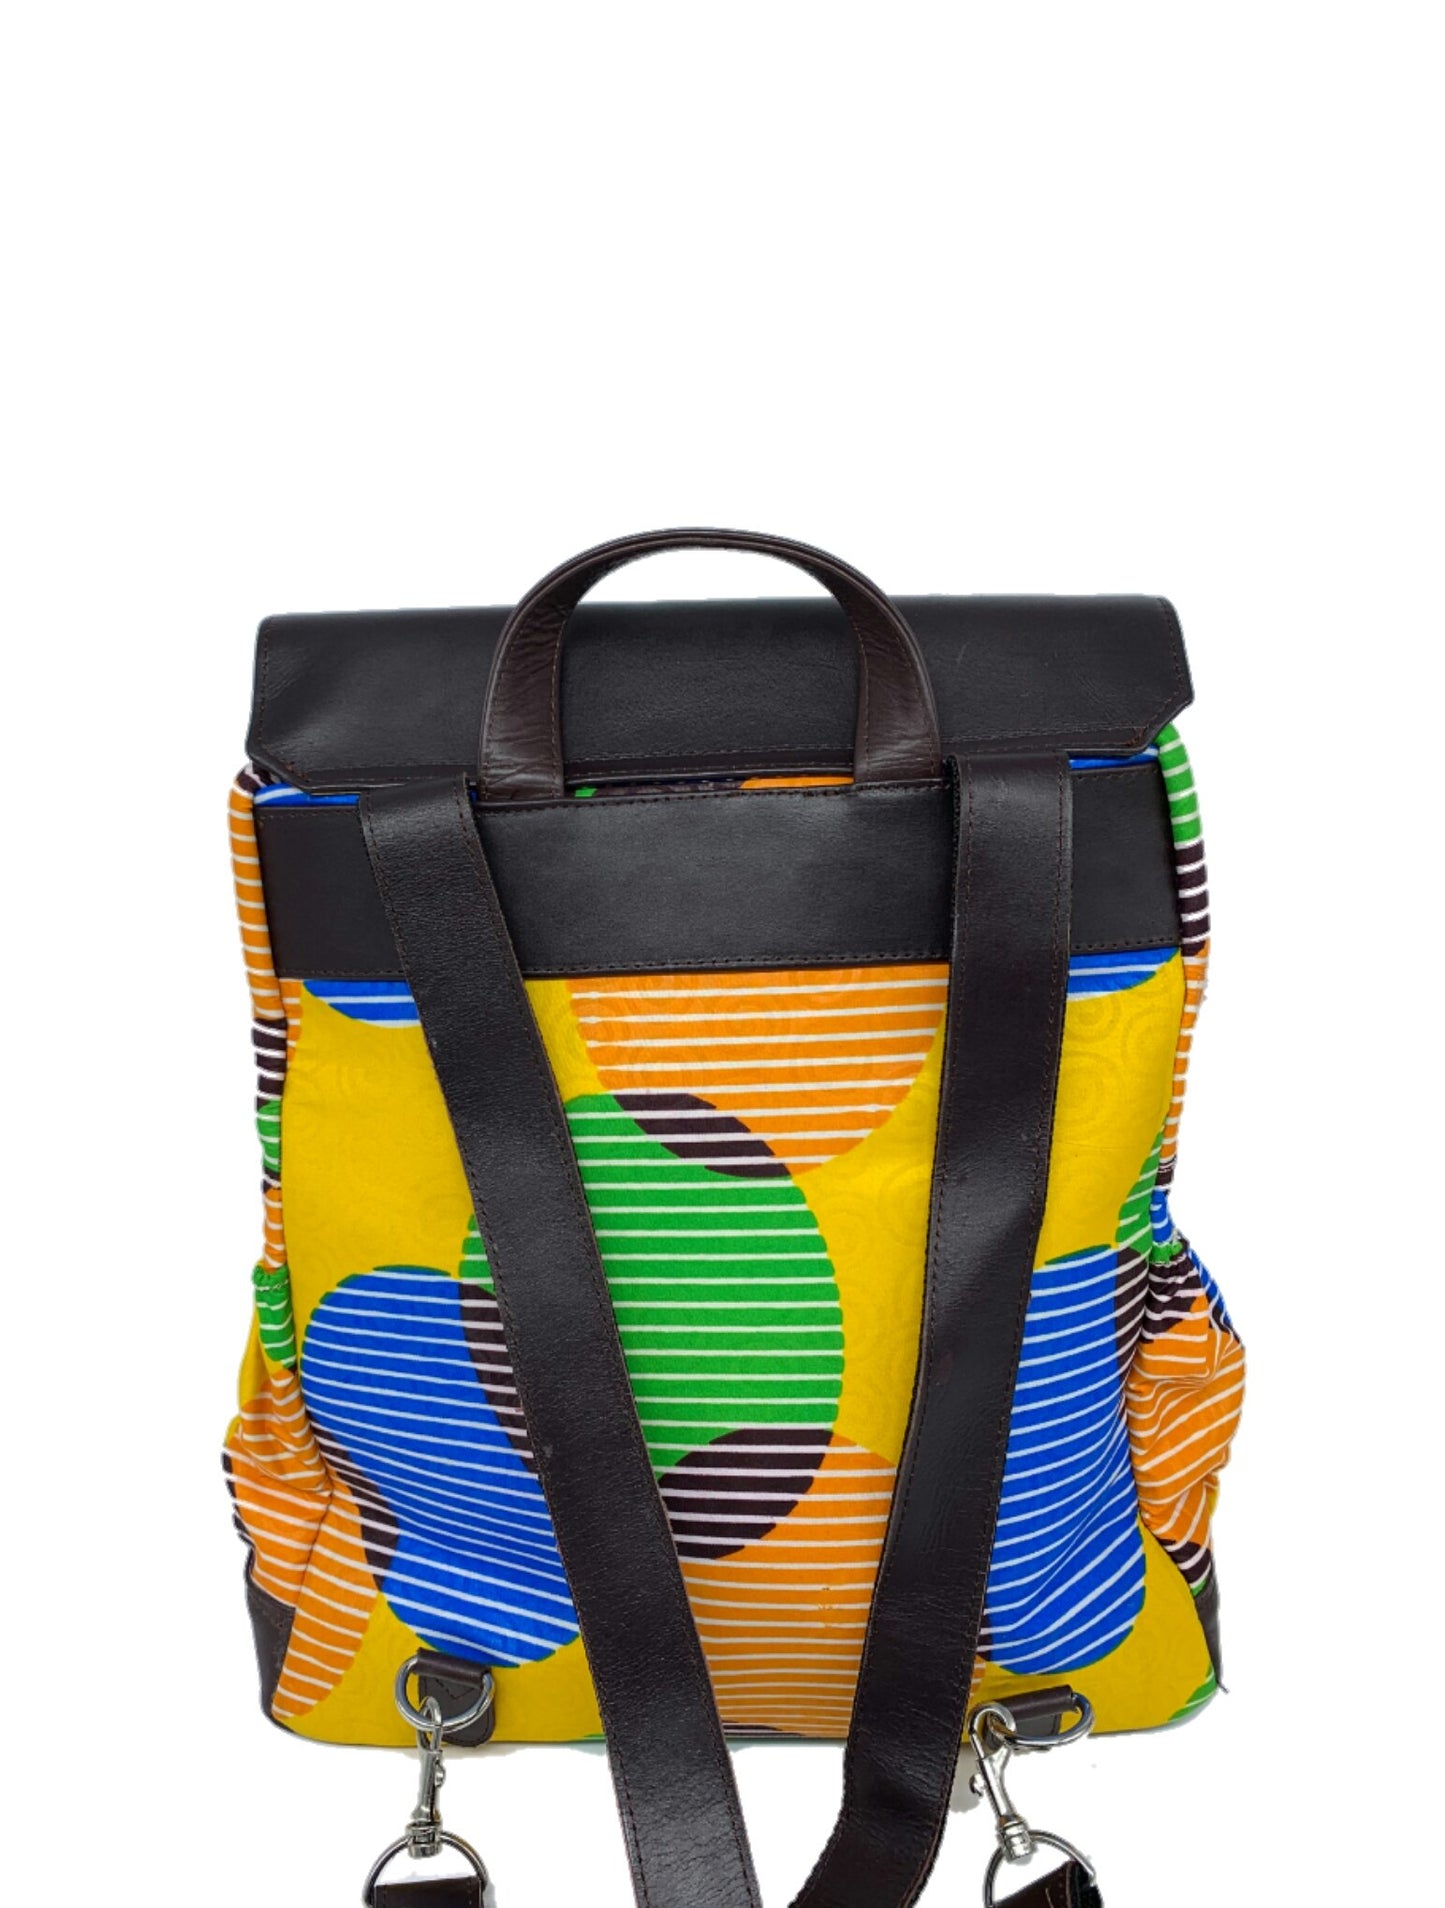 Convertible Backpack  with Ankara African Fabric - Weekender Bag for Women . Boho Tote or Cross Body Bag for Mothers Day, Granddaughter Gift